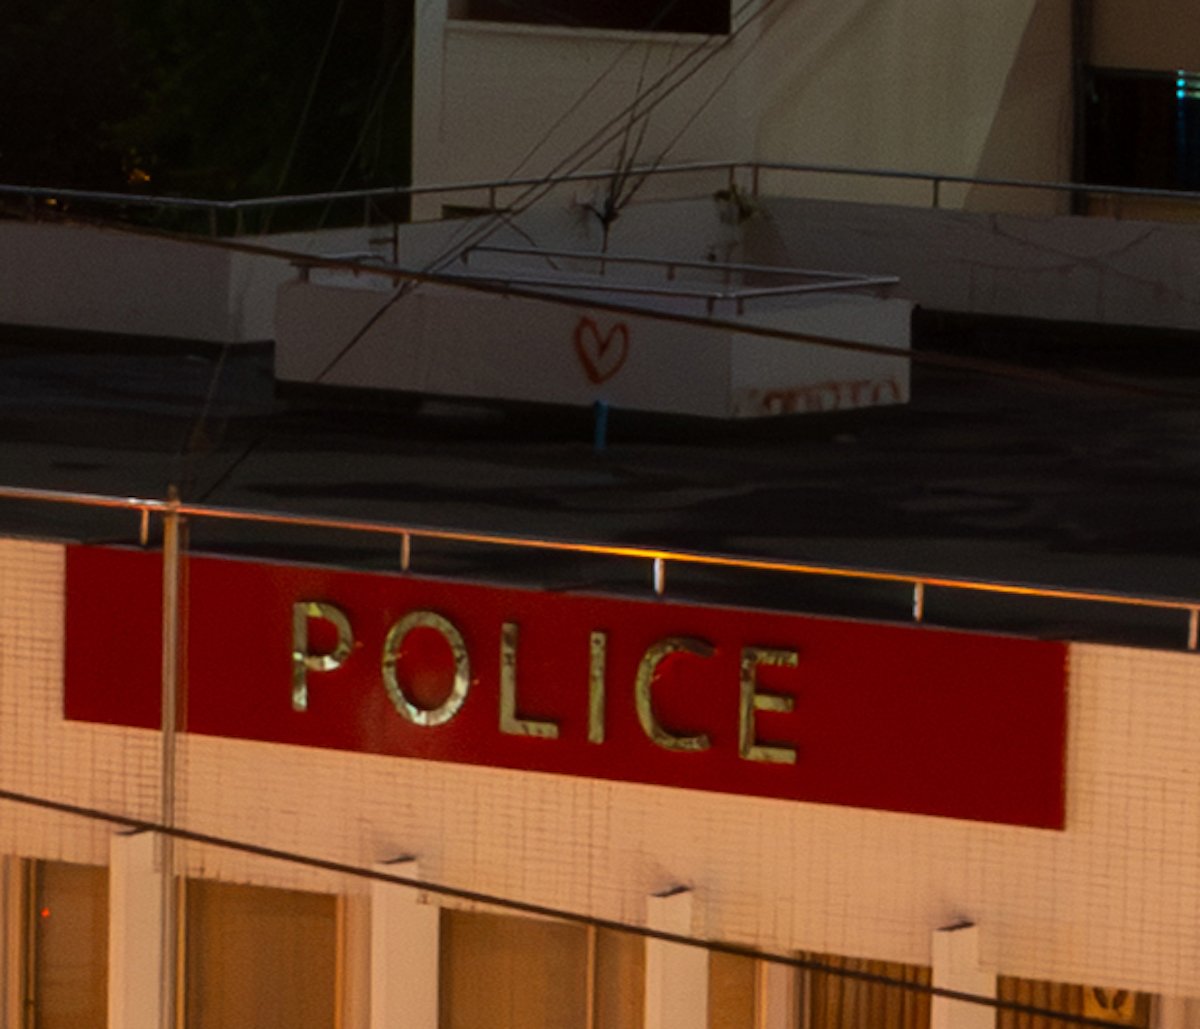 Lightroom image of rooftop and police sign with noise reduction